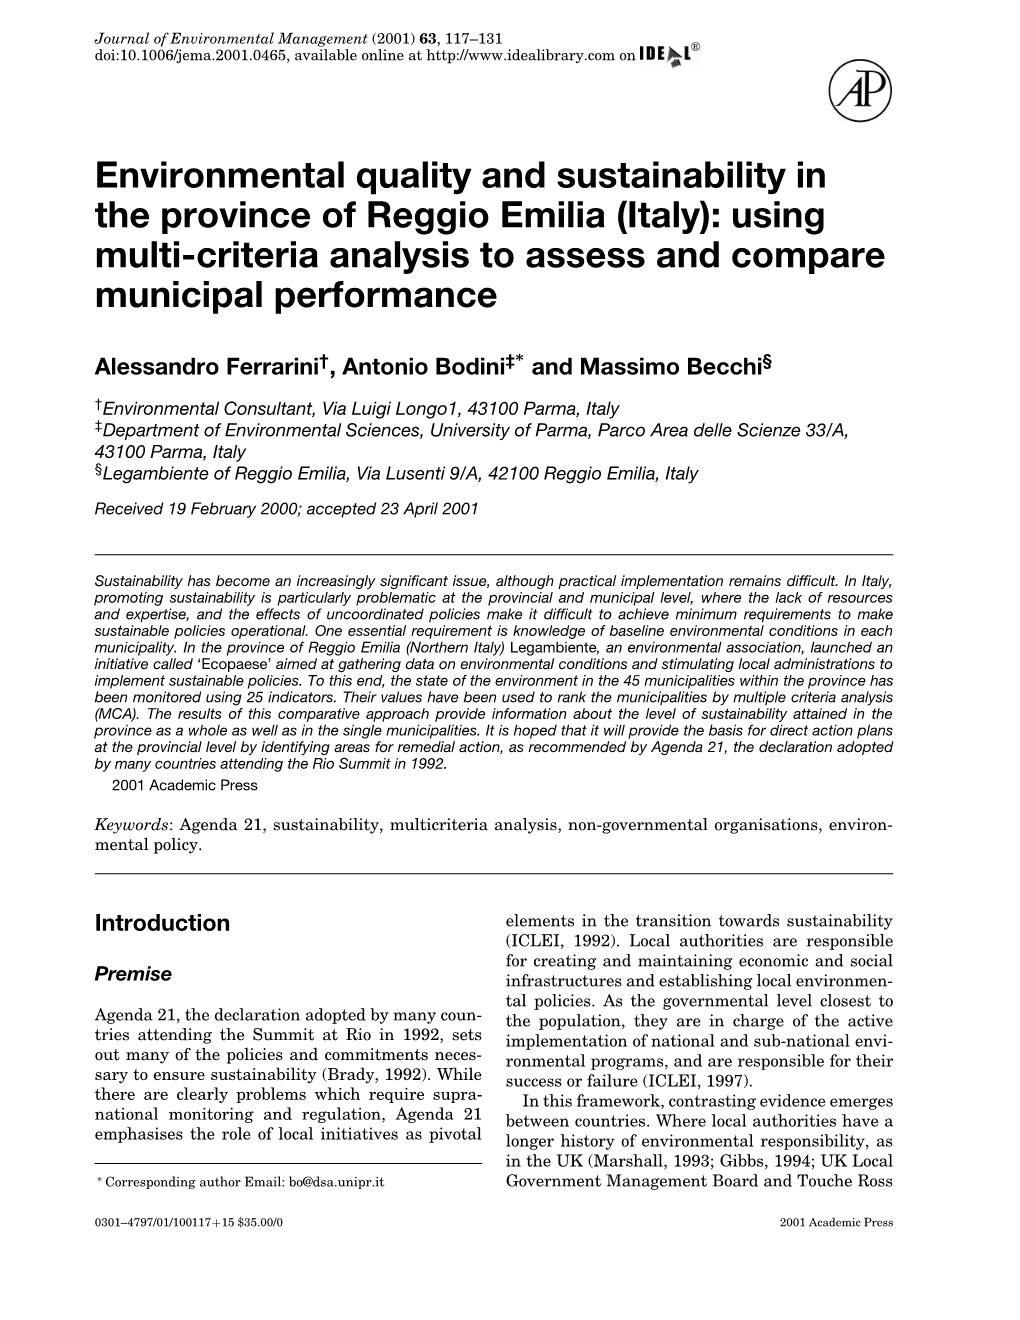 Environmental Quality and Sustainability in the Province of Reggio Emilia (Italy): Using Multi-Criteria Analysis to Assess and Compare Municipal Performance